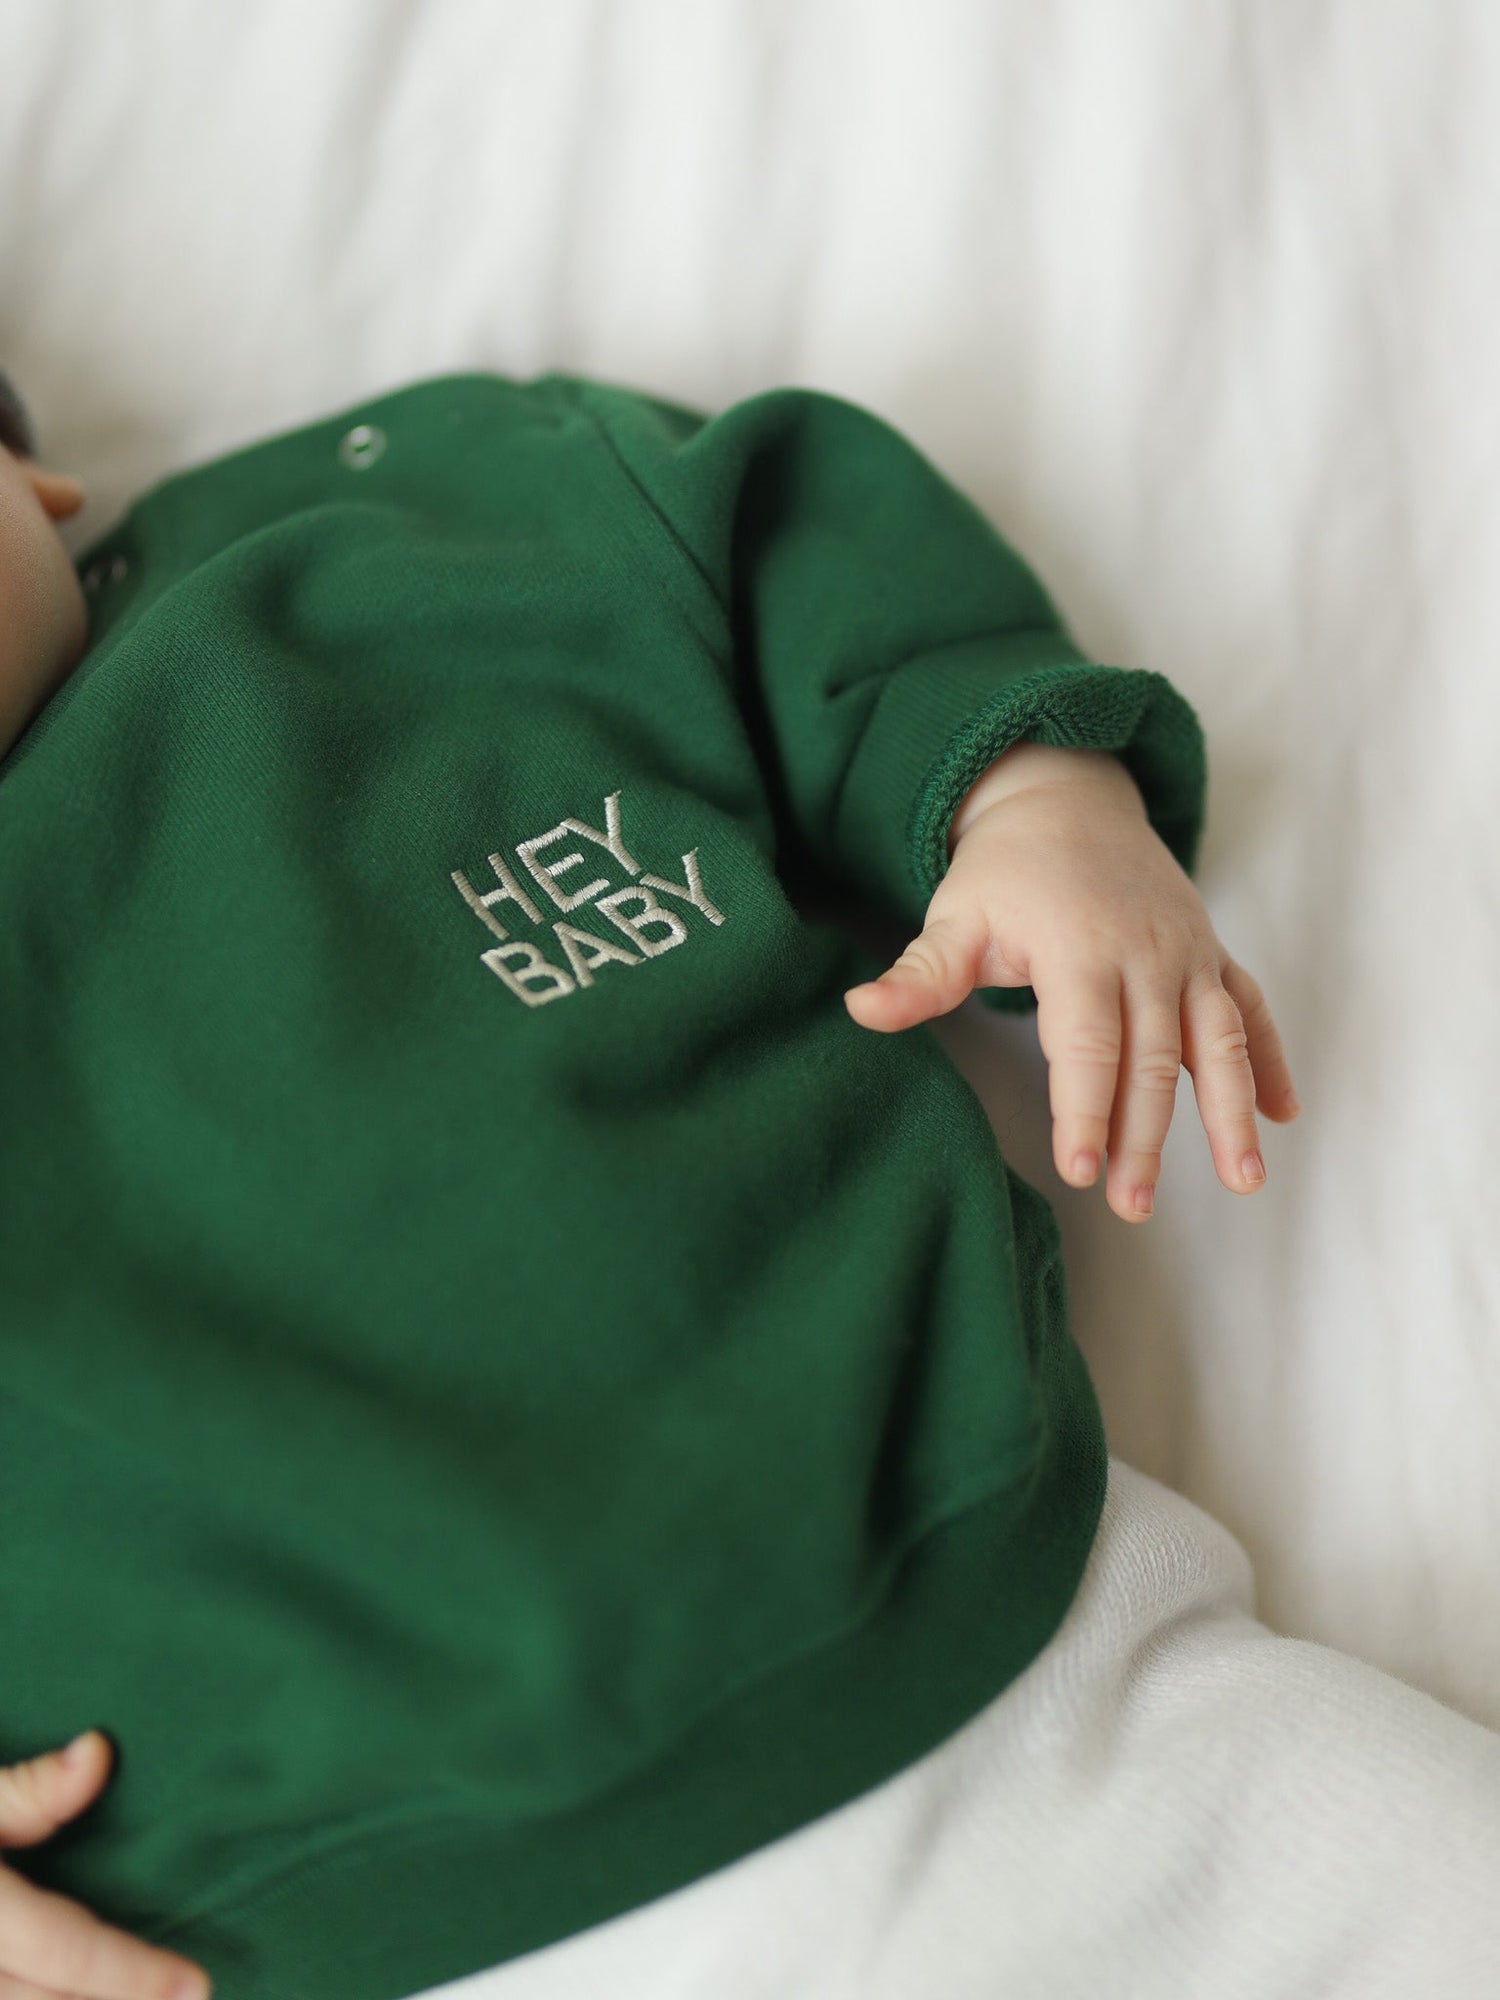 Sweatshirt HEY BABY 'Pinewoodgreen' - The Little One • Family.Concept.Store. 